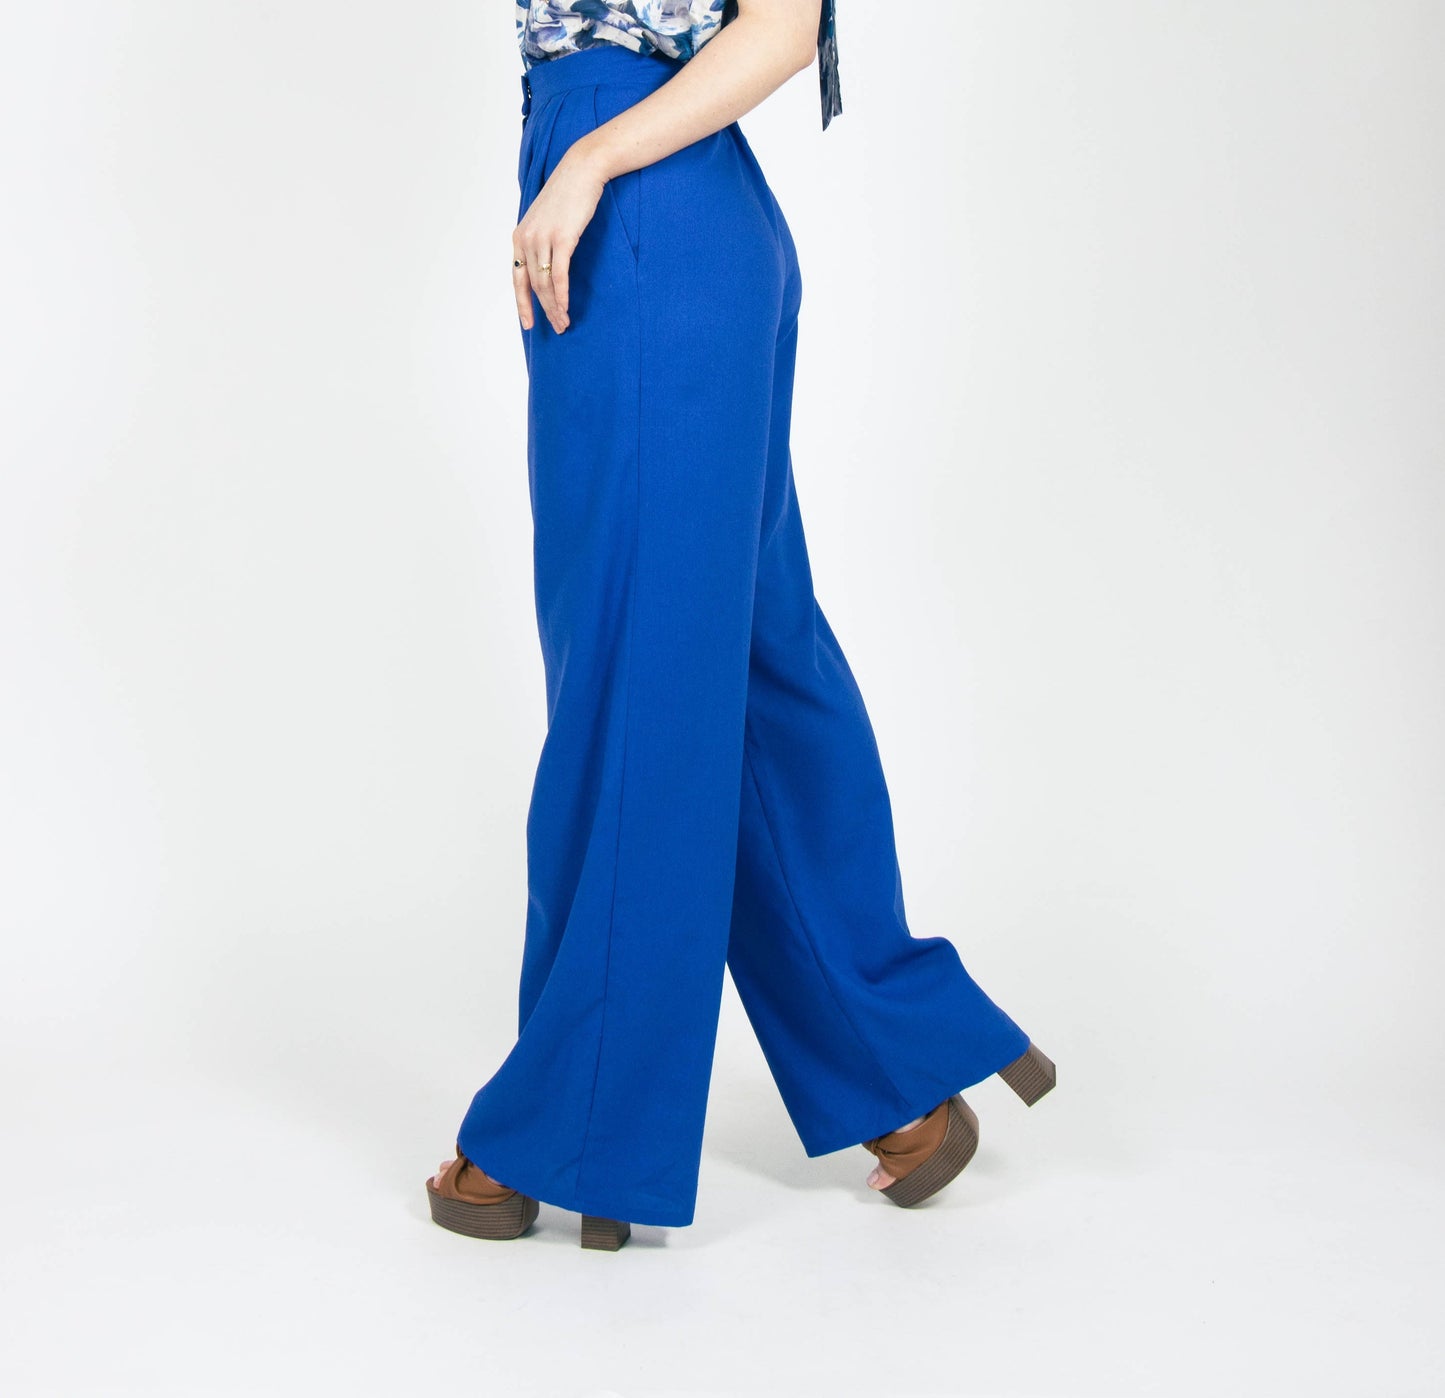 royal blue wide leg vintage style trousers made in ireland platform shoes 